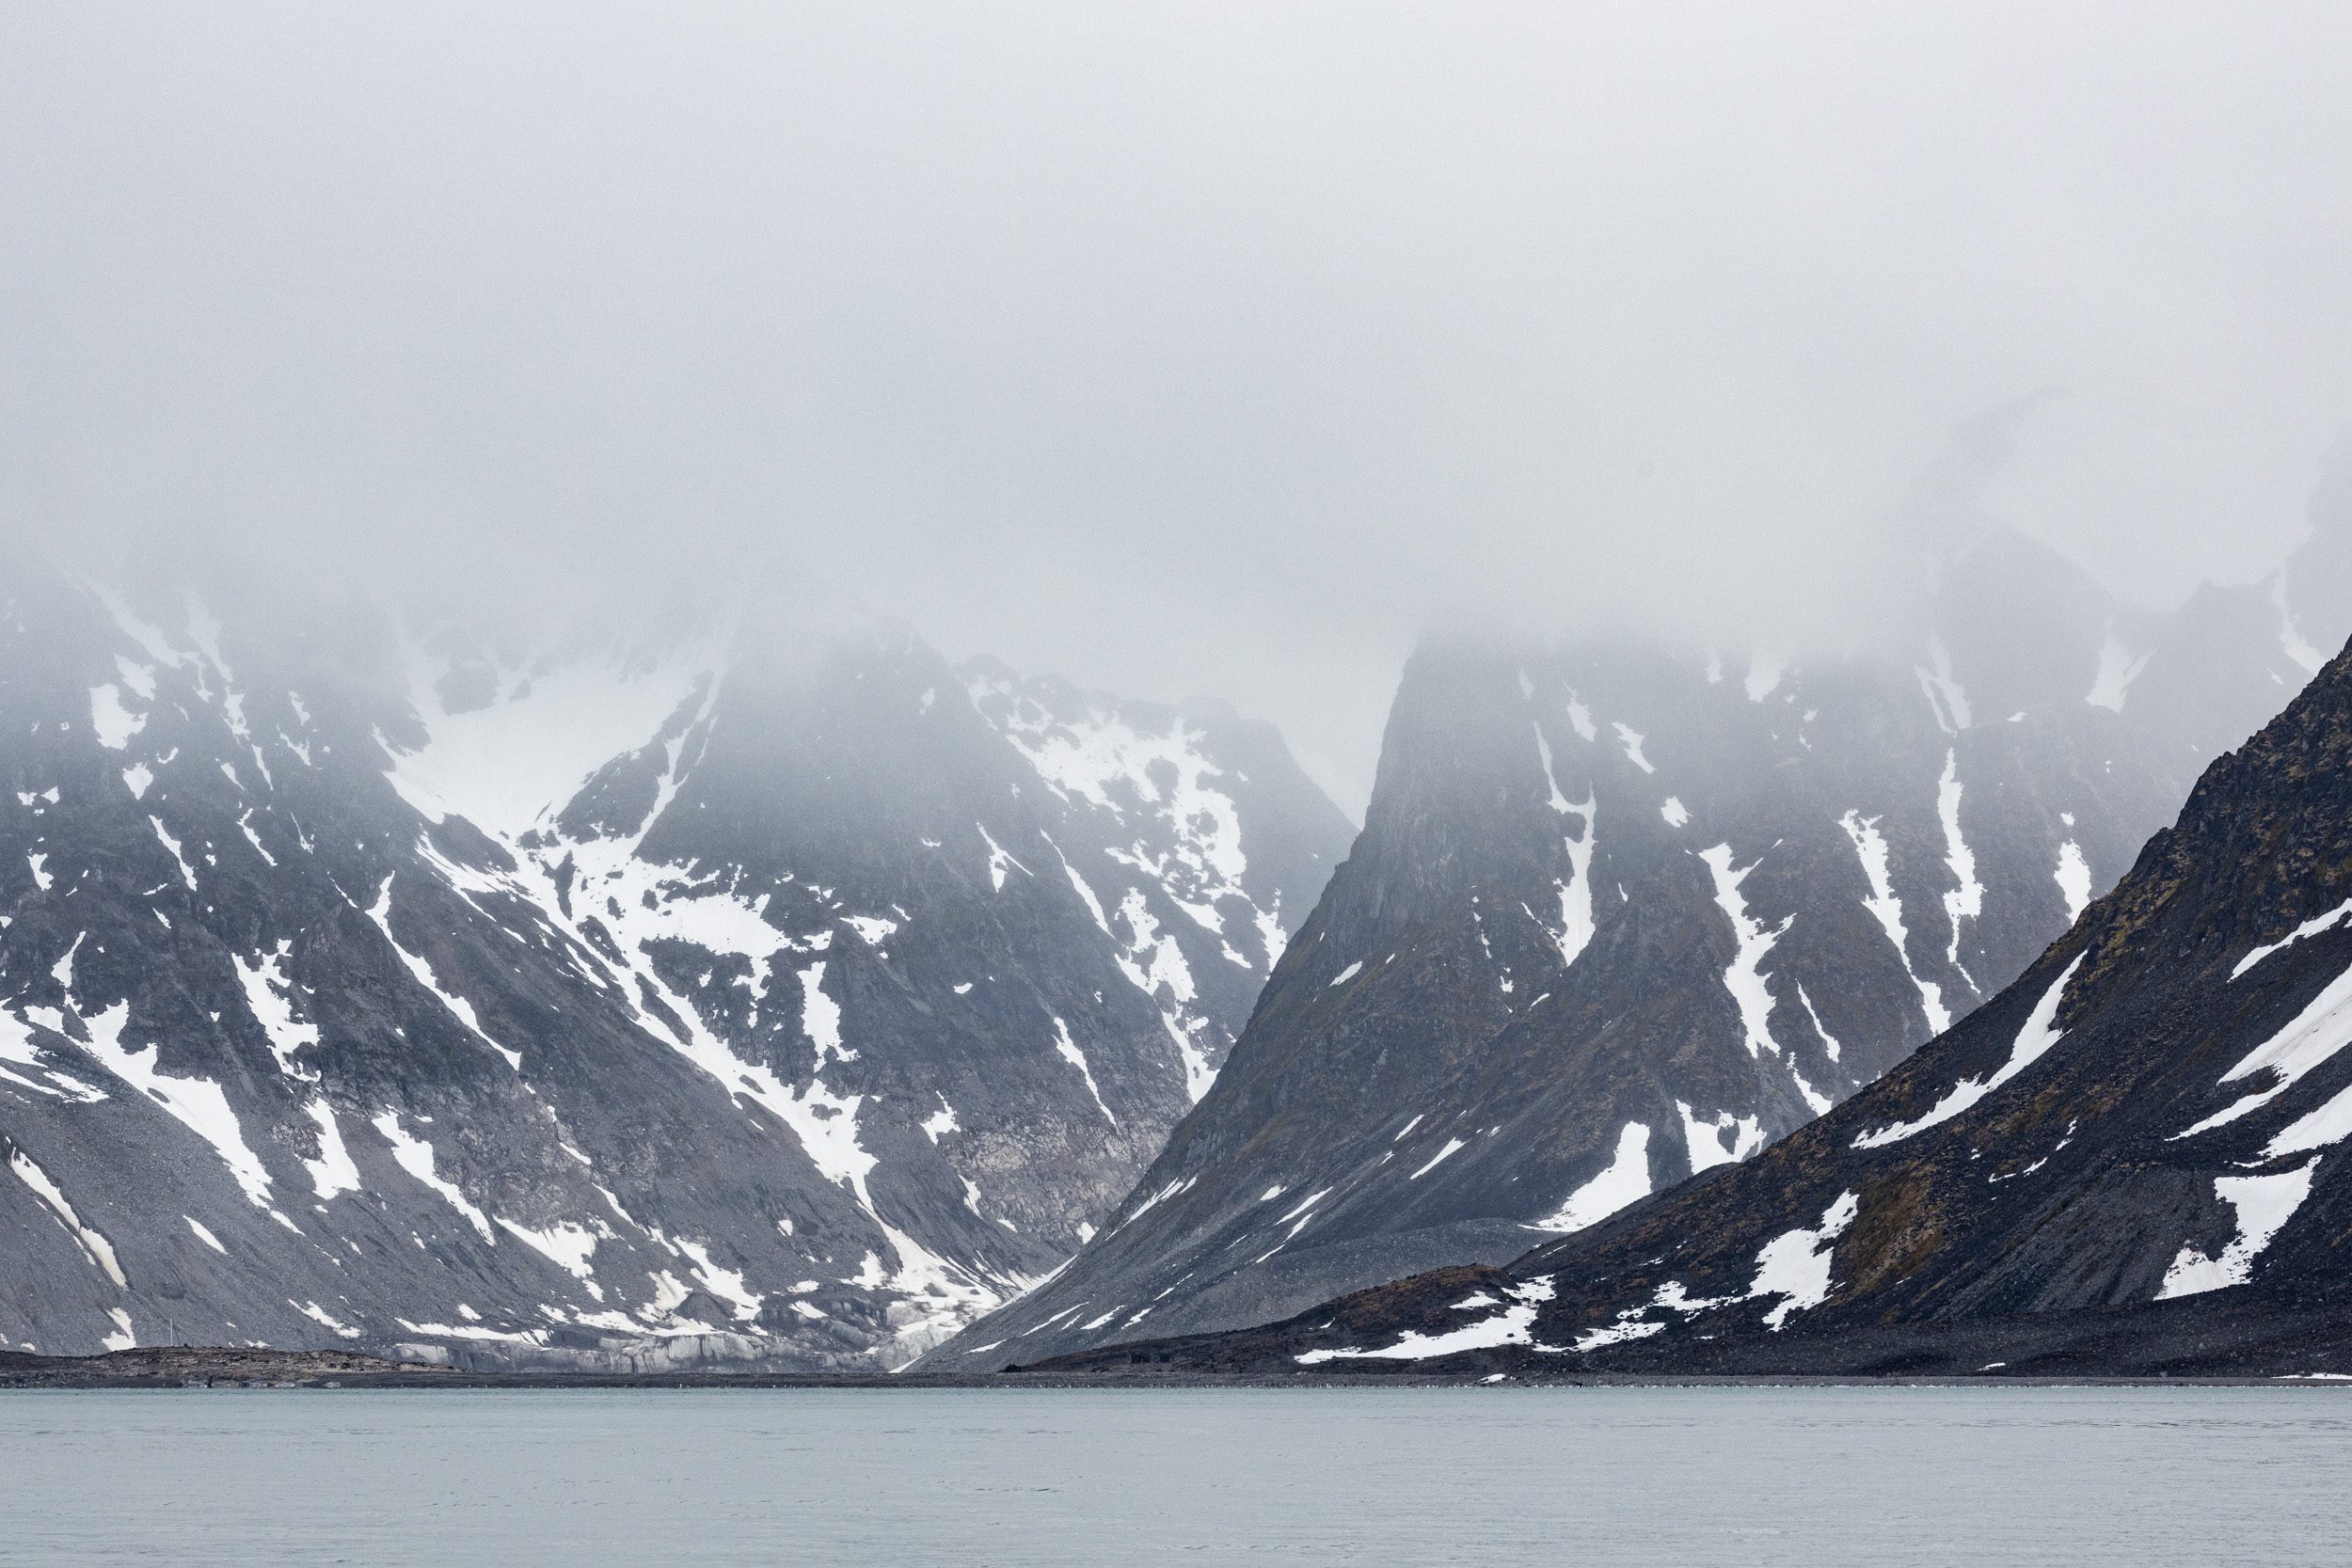 Sailing Expedition in the Svalbard Archipelago - Part 1